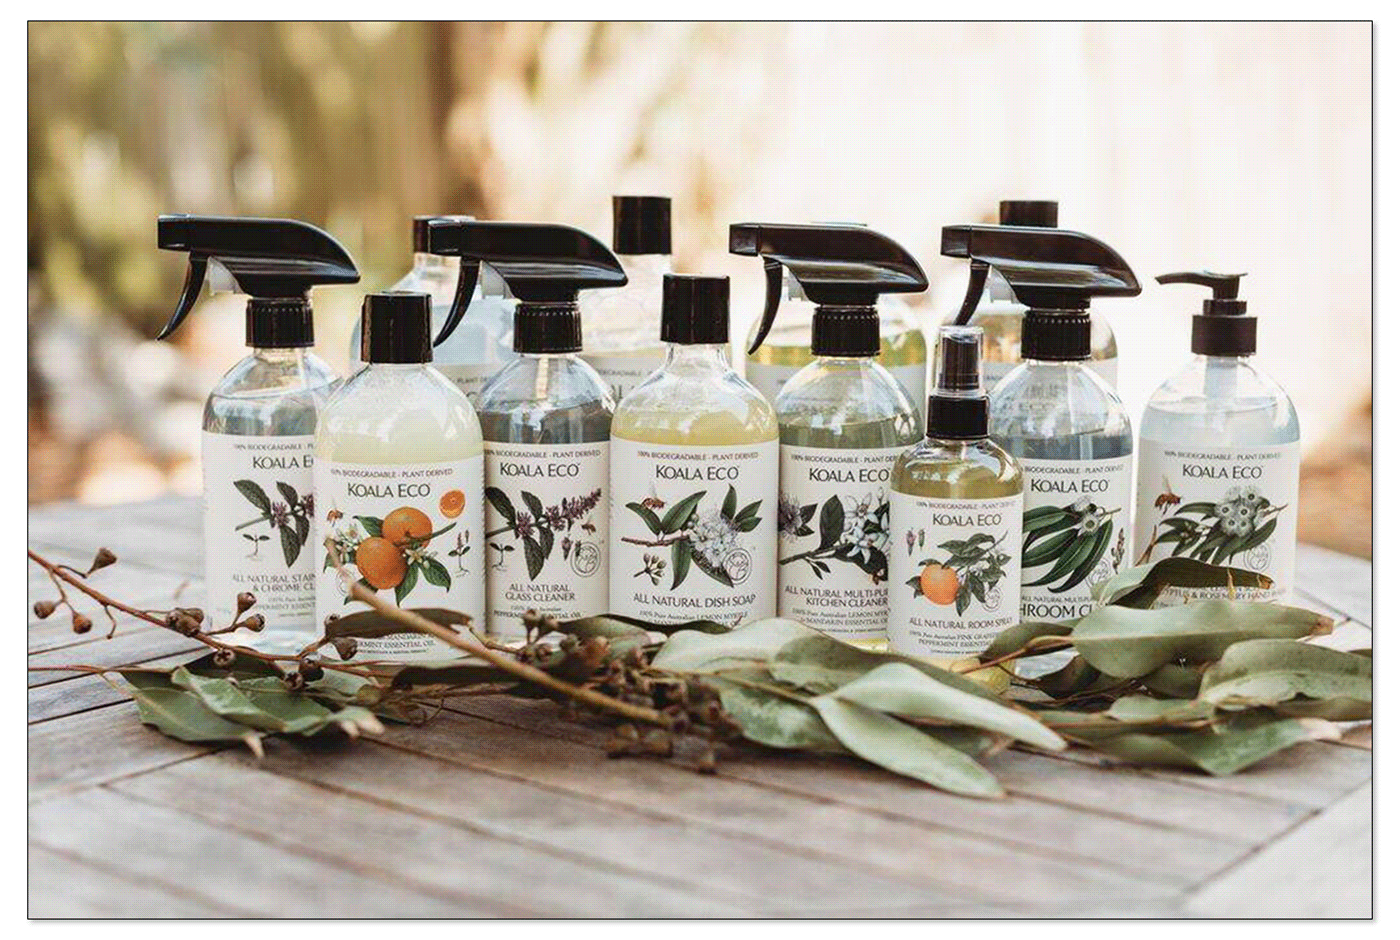 Packaging illustrations for Koala Eco products.